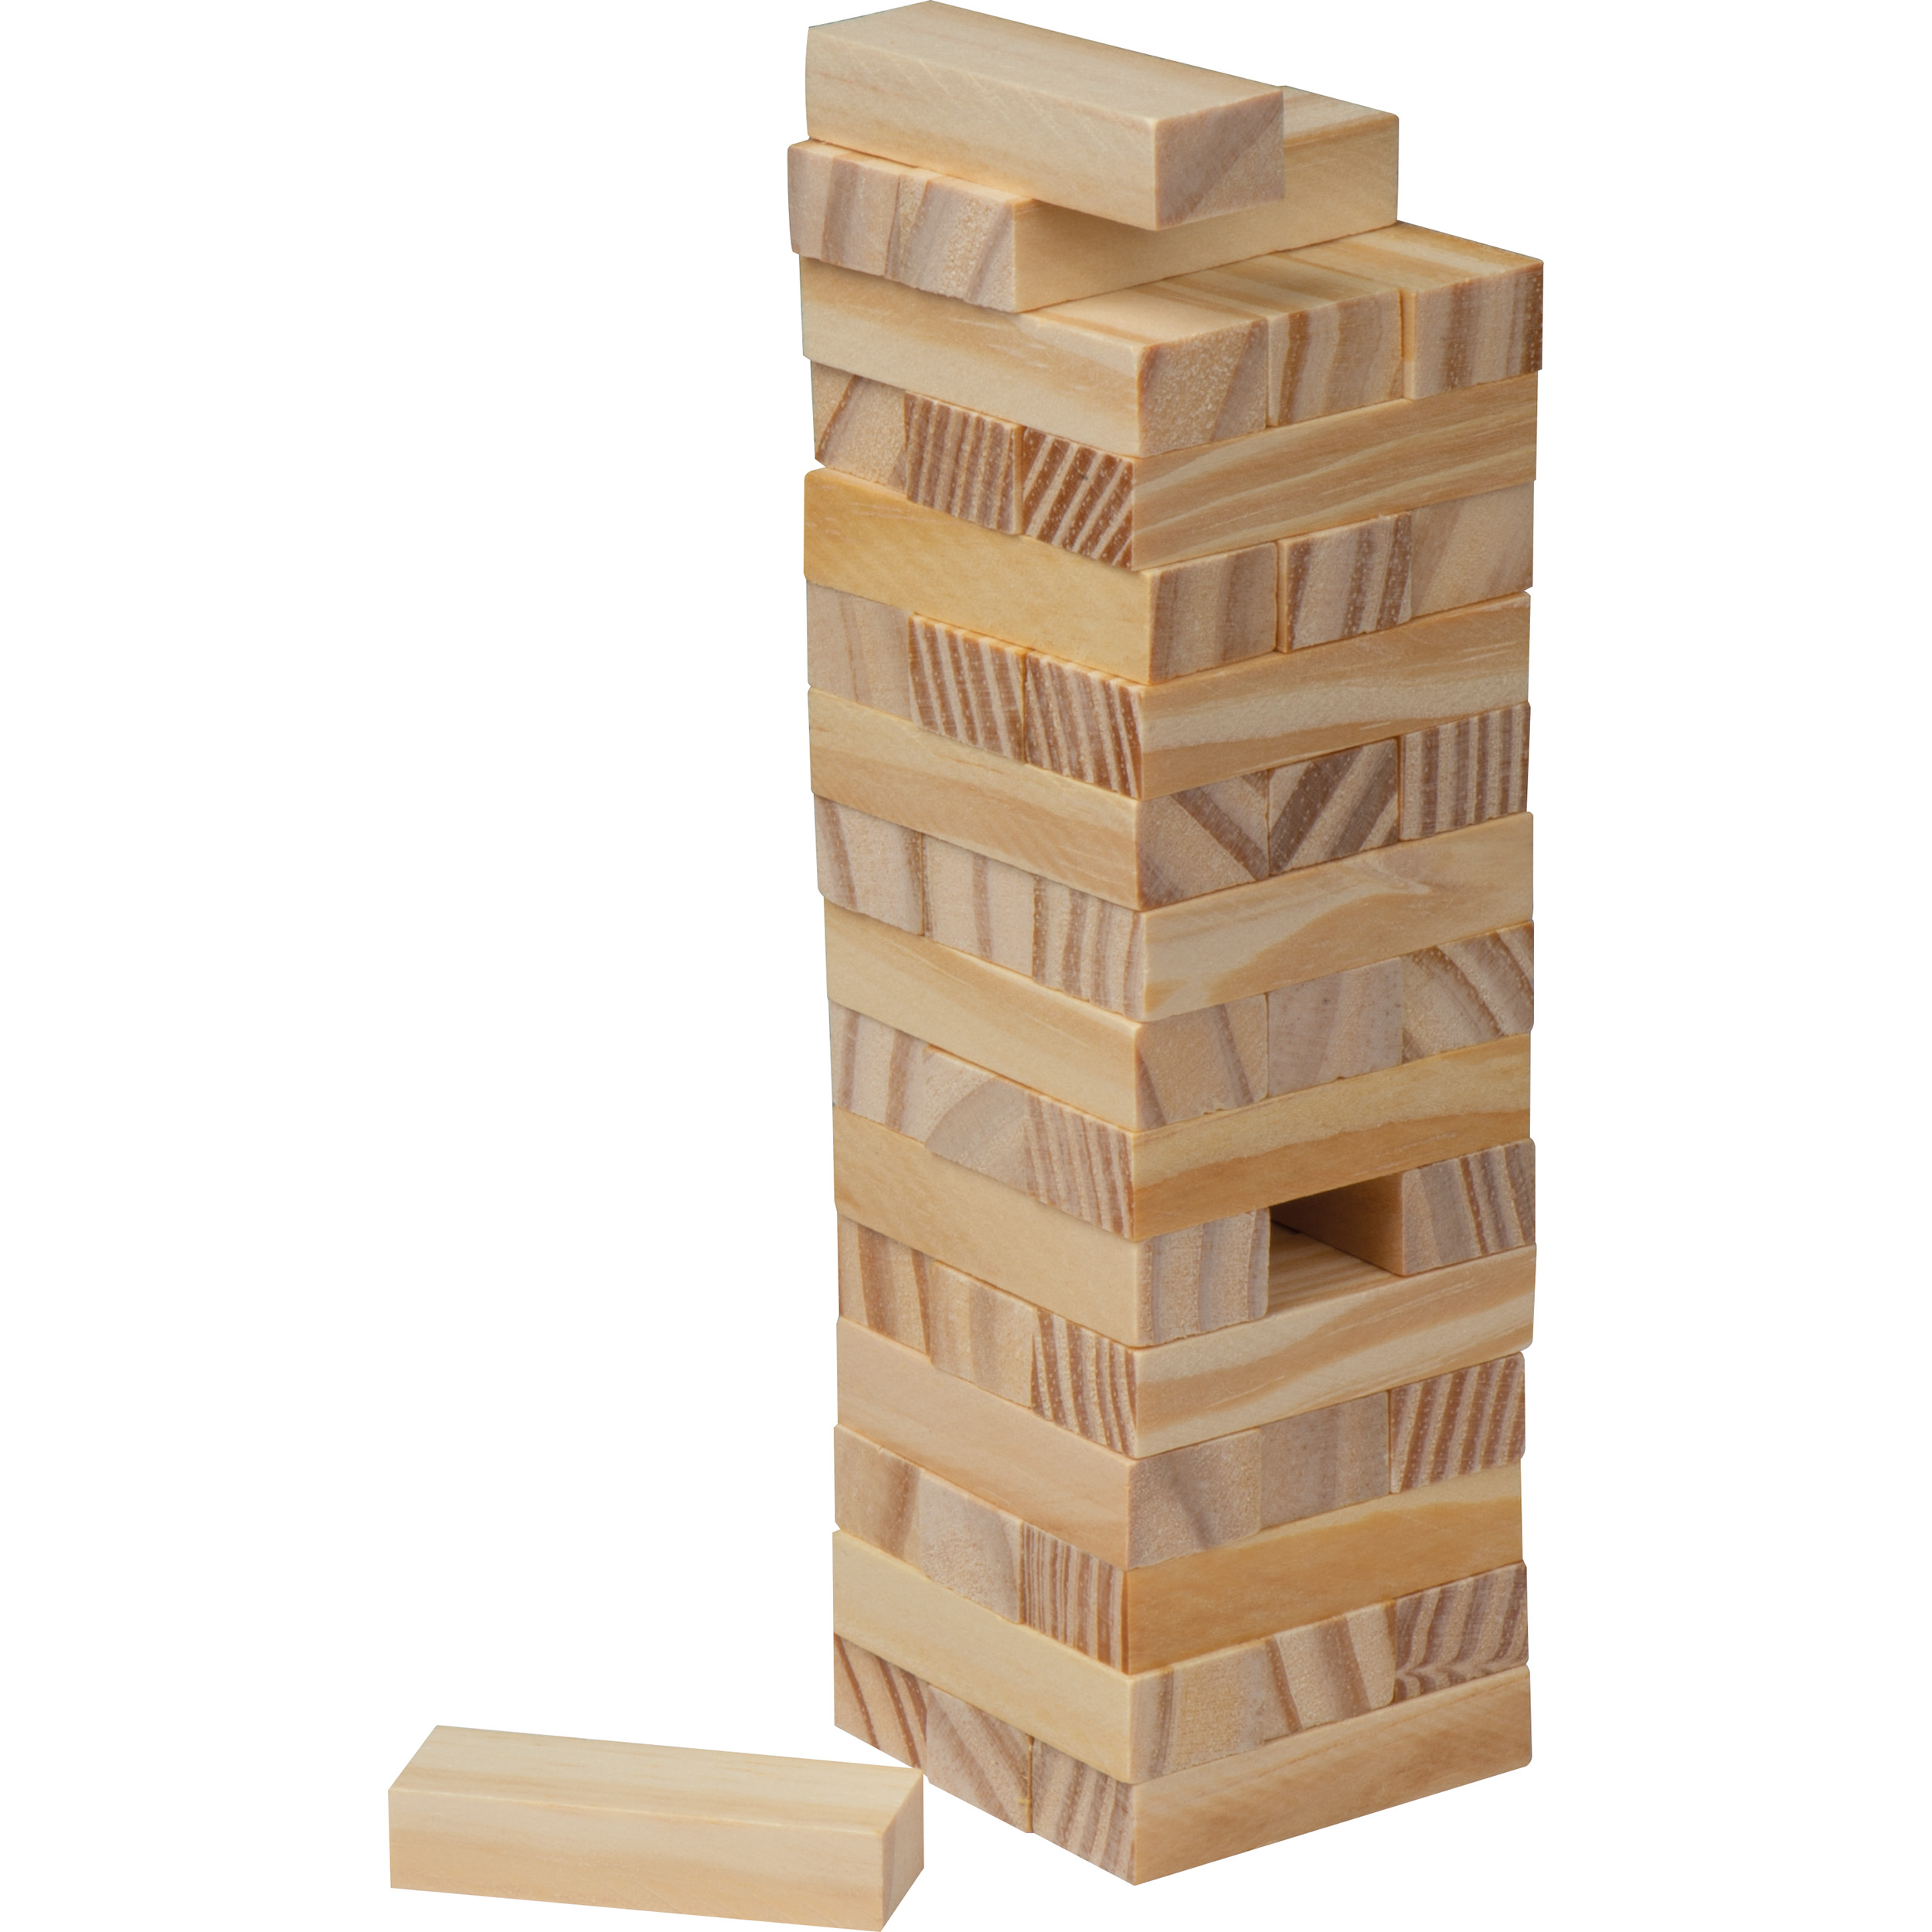 Wooden Tower Stacking Game - East Meon - Upper Whitley